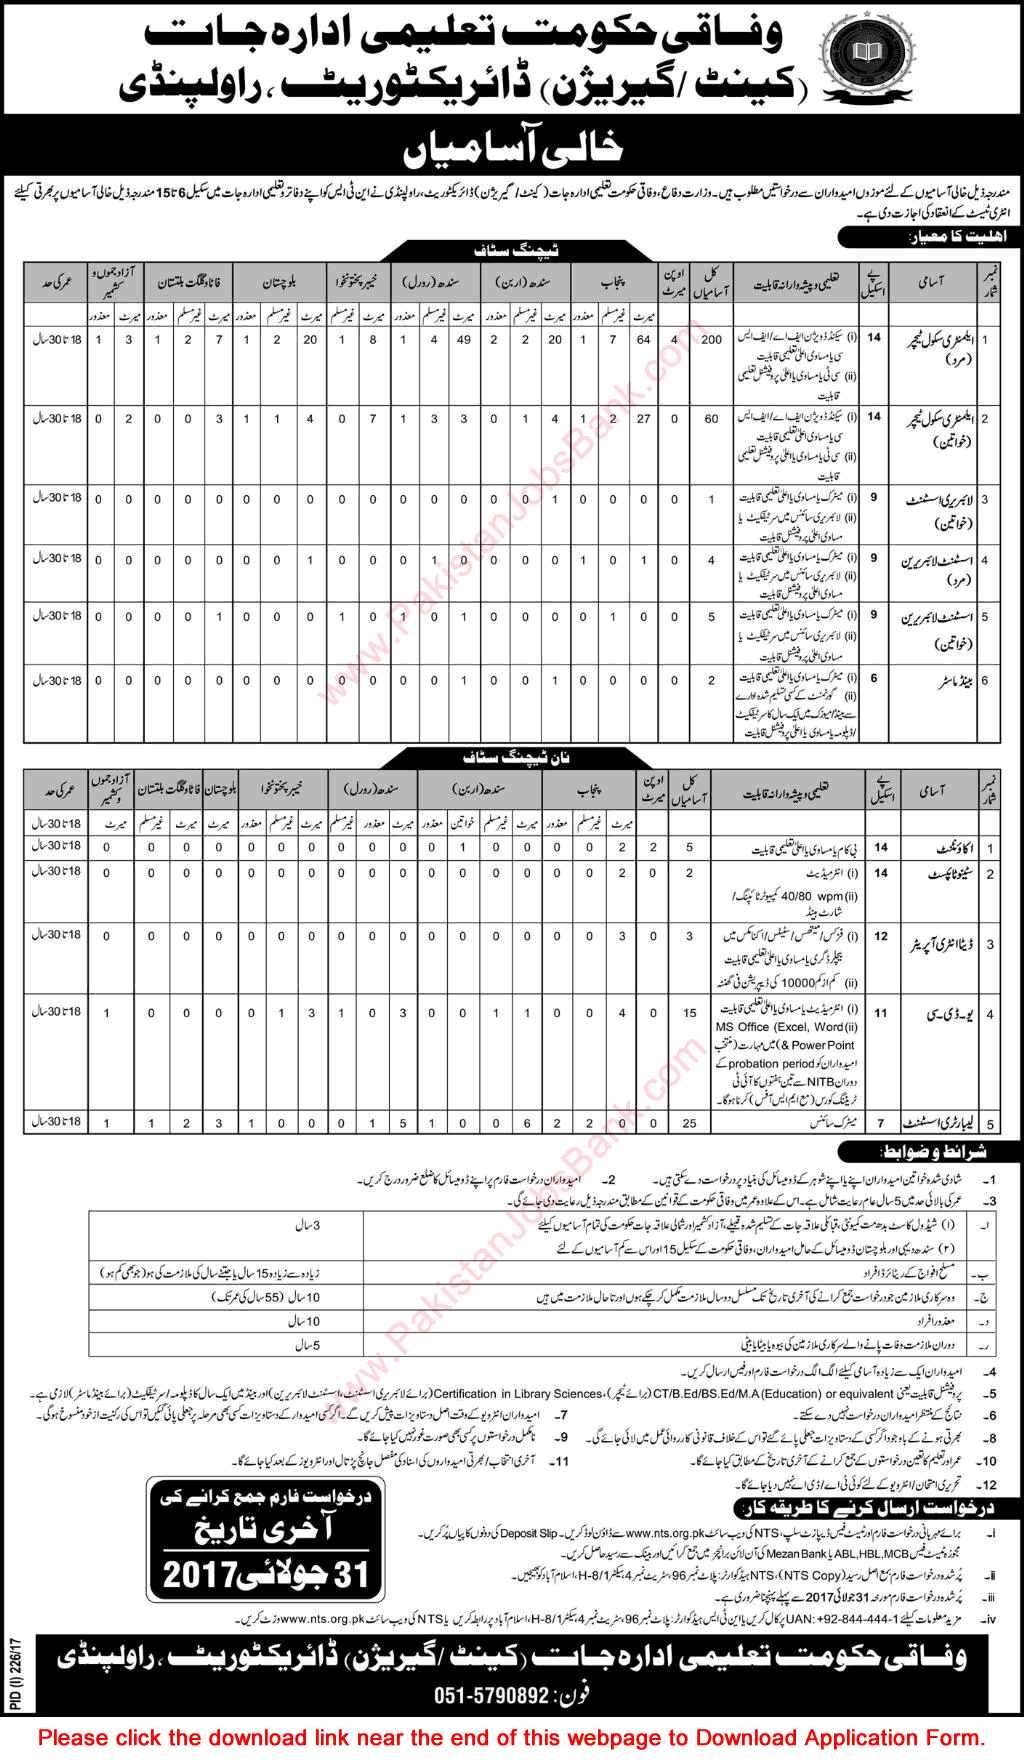 Federal Government Educational Institutions Cantt Garrison Jobs 2017 July NTS Application Form Teachers & Others Latest